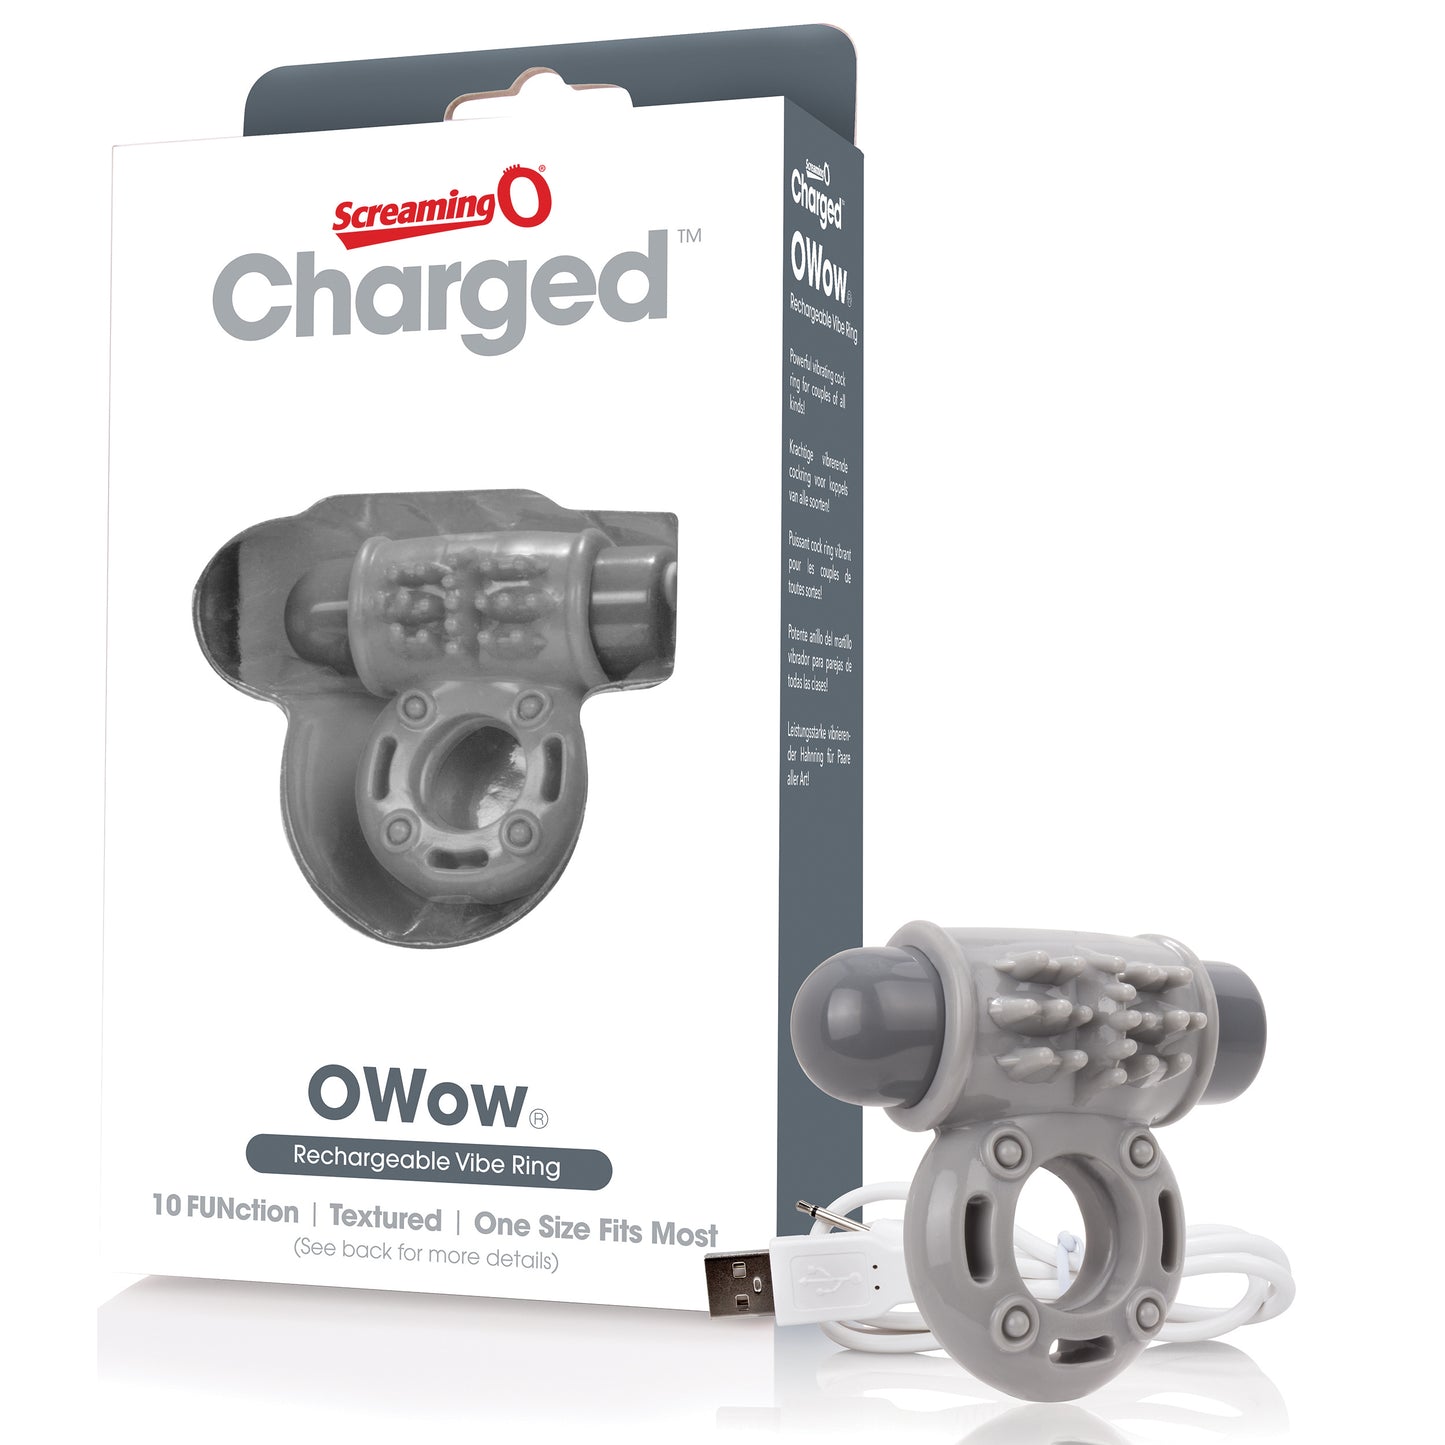 Charged Owow Rechargeable Vibe Ring - Grey AOW-G-101E